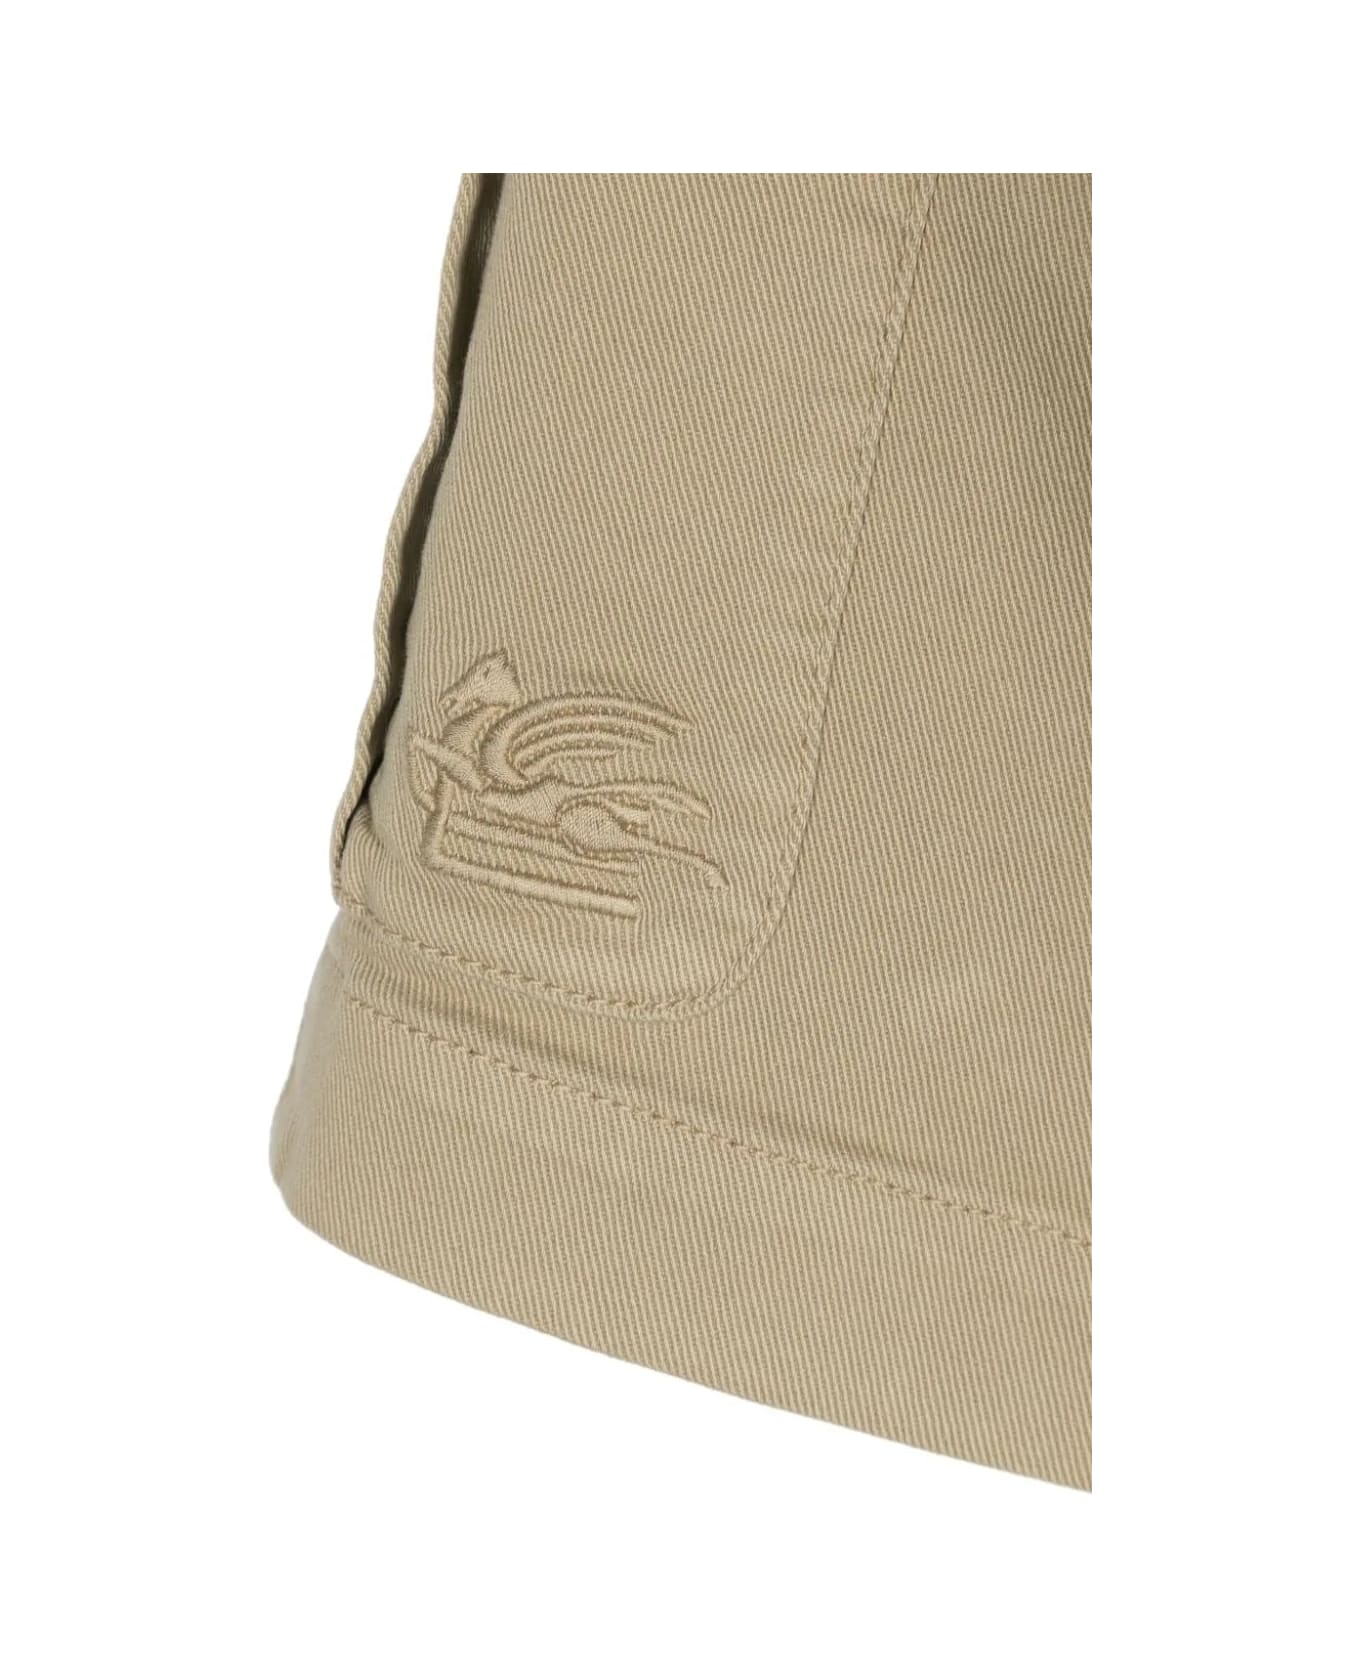 Etro Beige Cargo Shorts With Logo - Brown ボトムス